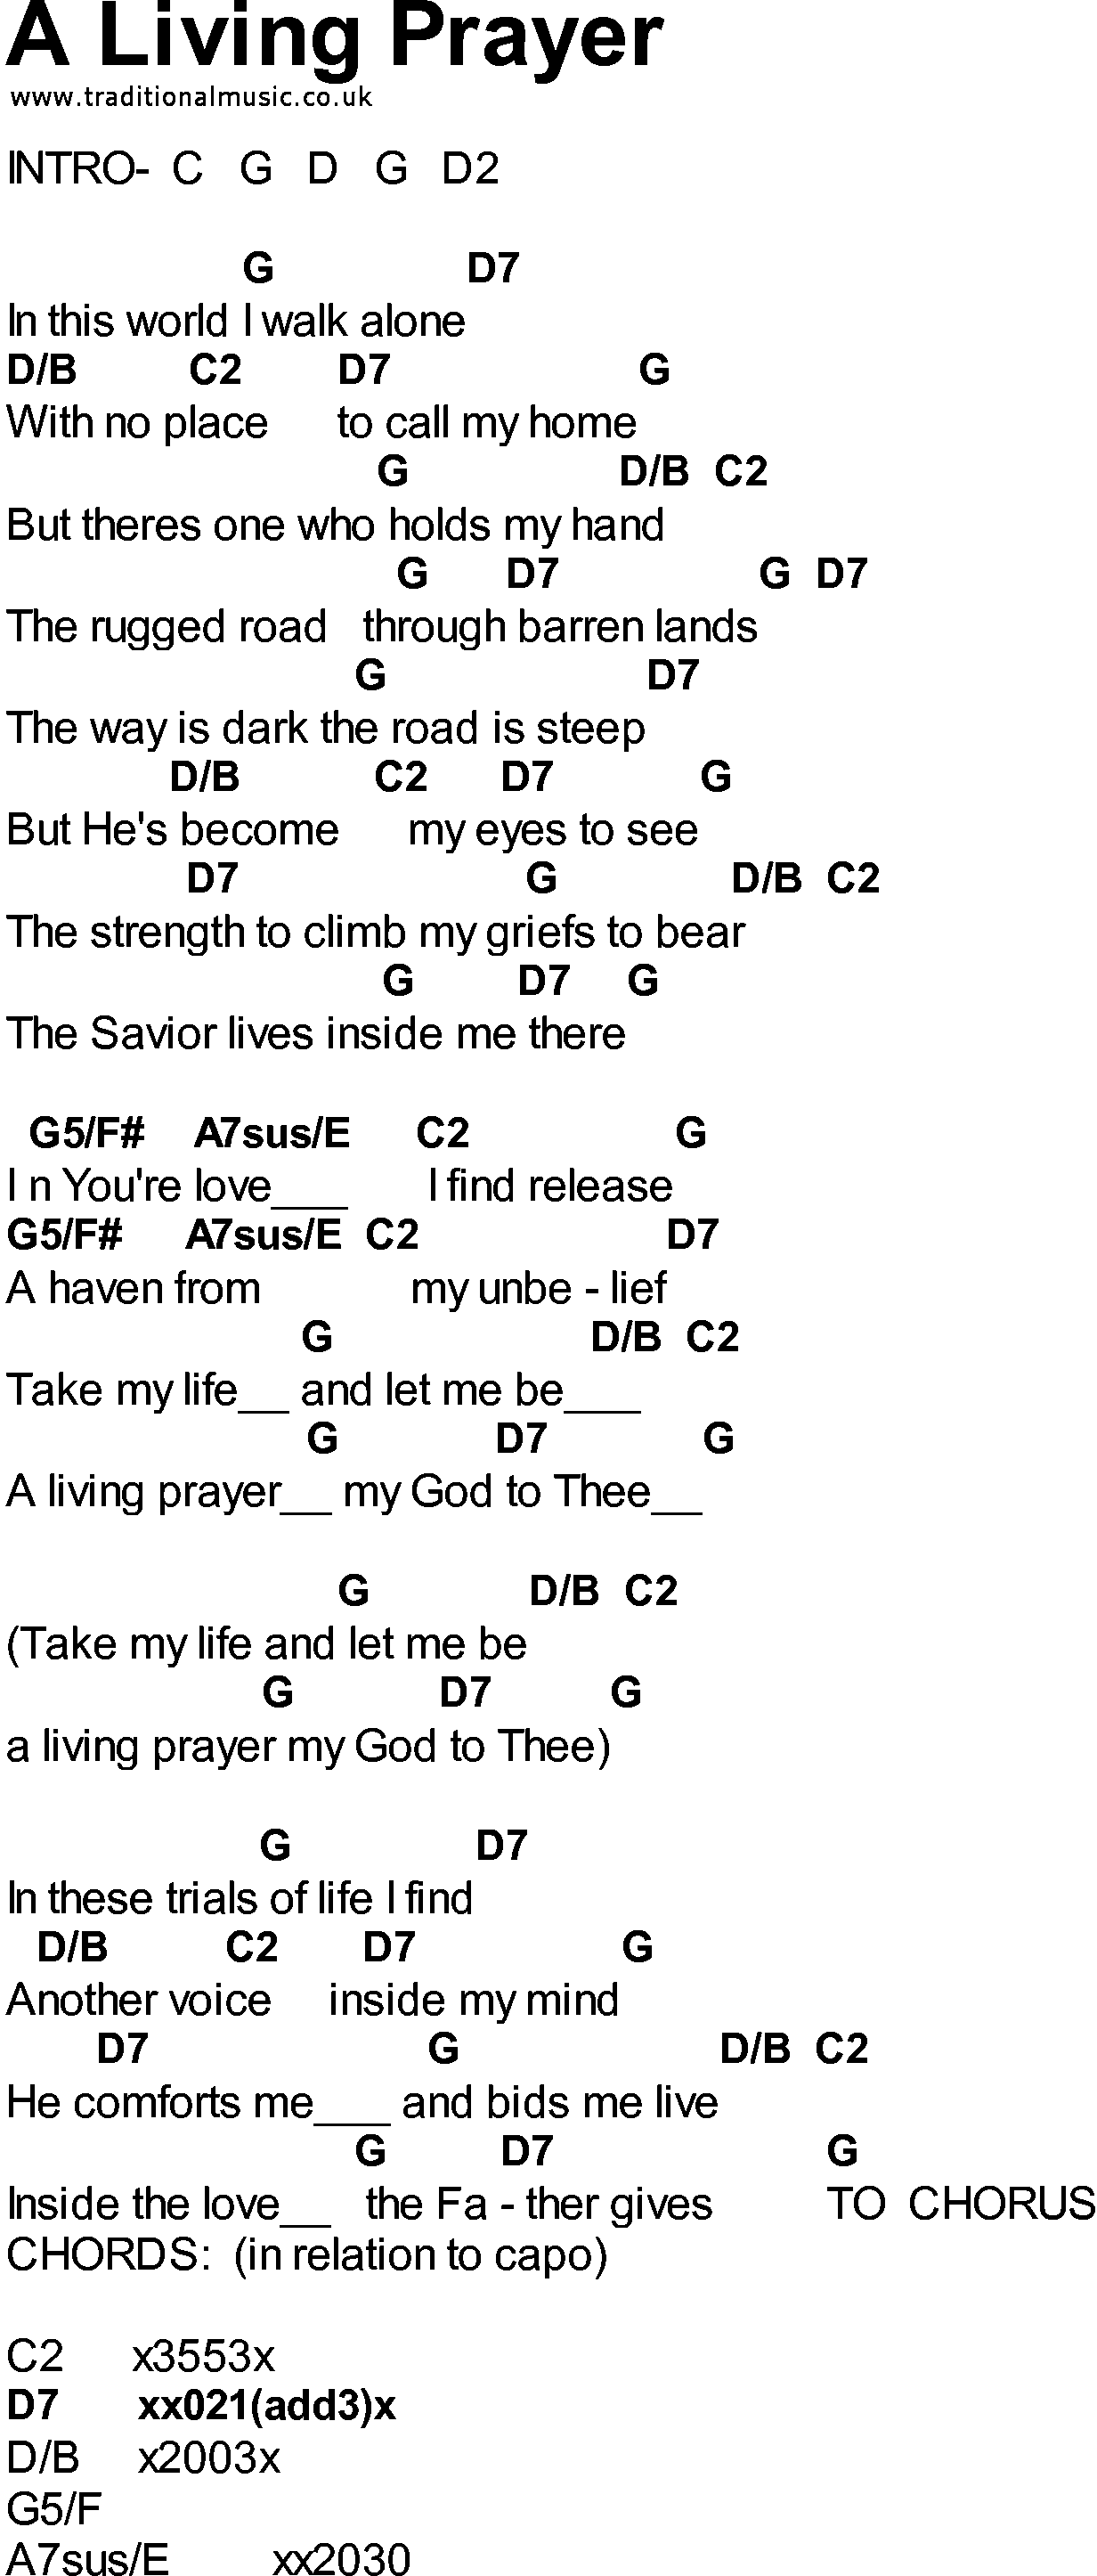 Bluegrass songs with chords - A Living Prayer